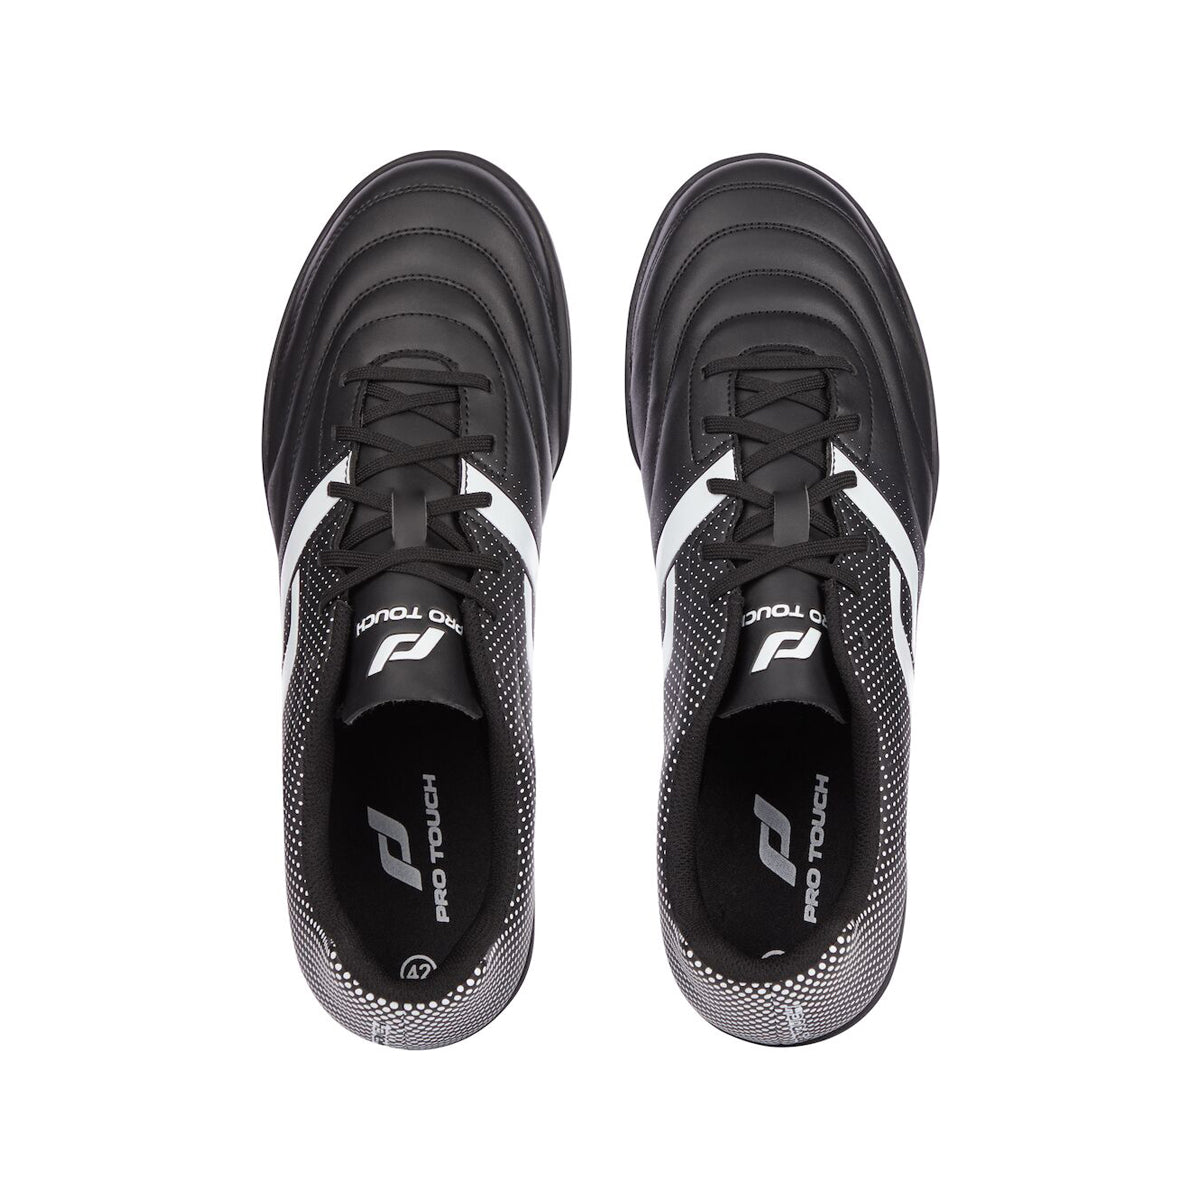 Pro Touch Classic Football Tartan Shoes For Men, Black & White